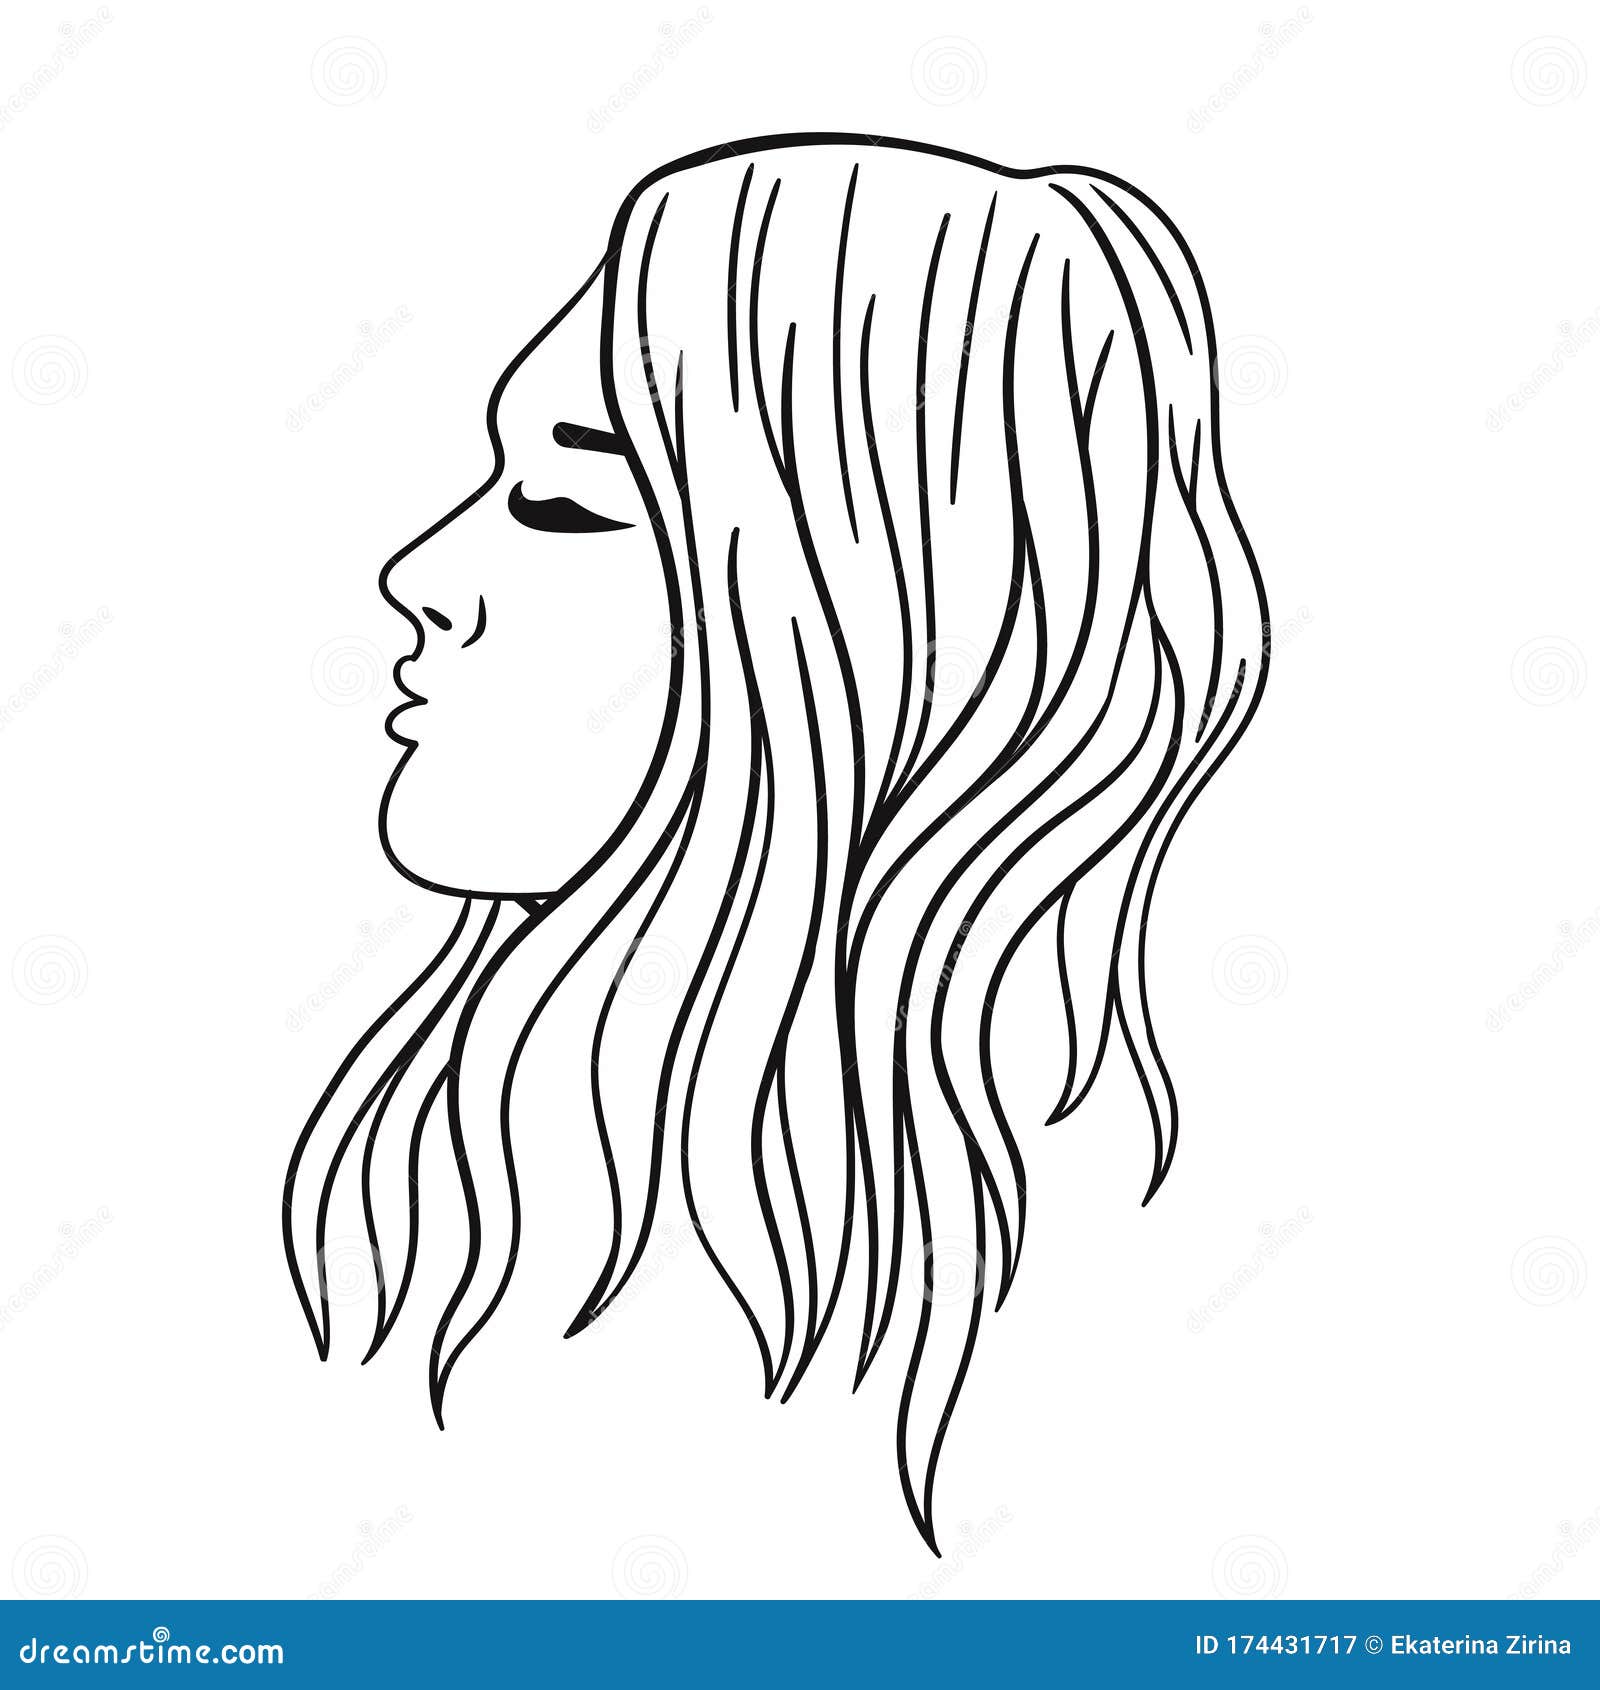 Women S Hairstyle for Long Hair. Black Outline on a White Background.  Vector Graphics Stock Illustration - Illustration of female, clipart:  174431717